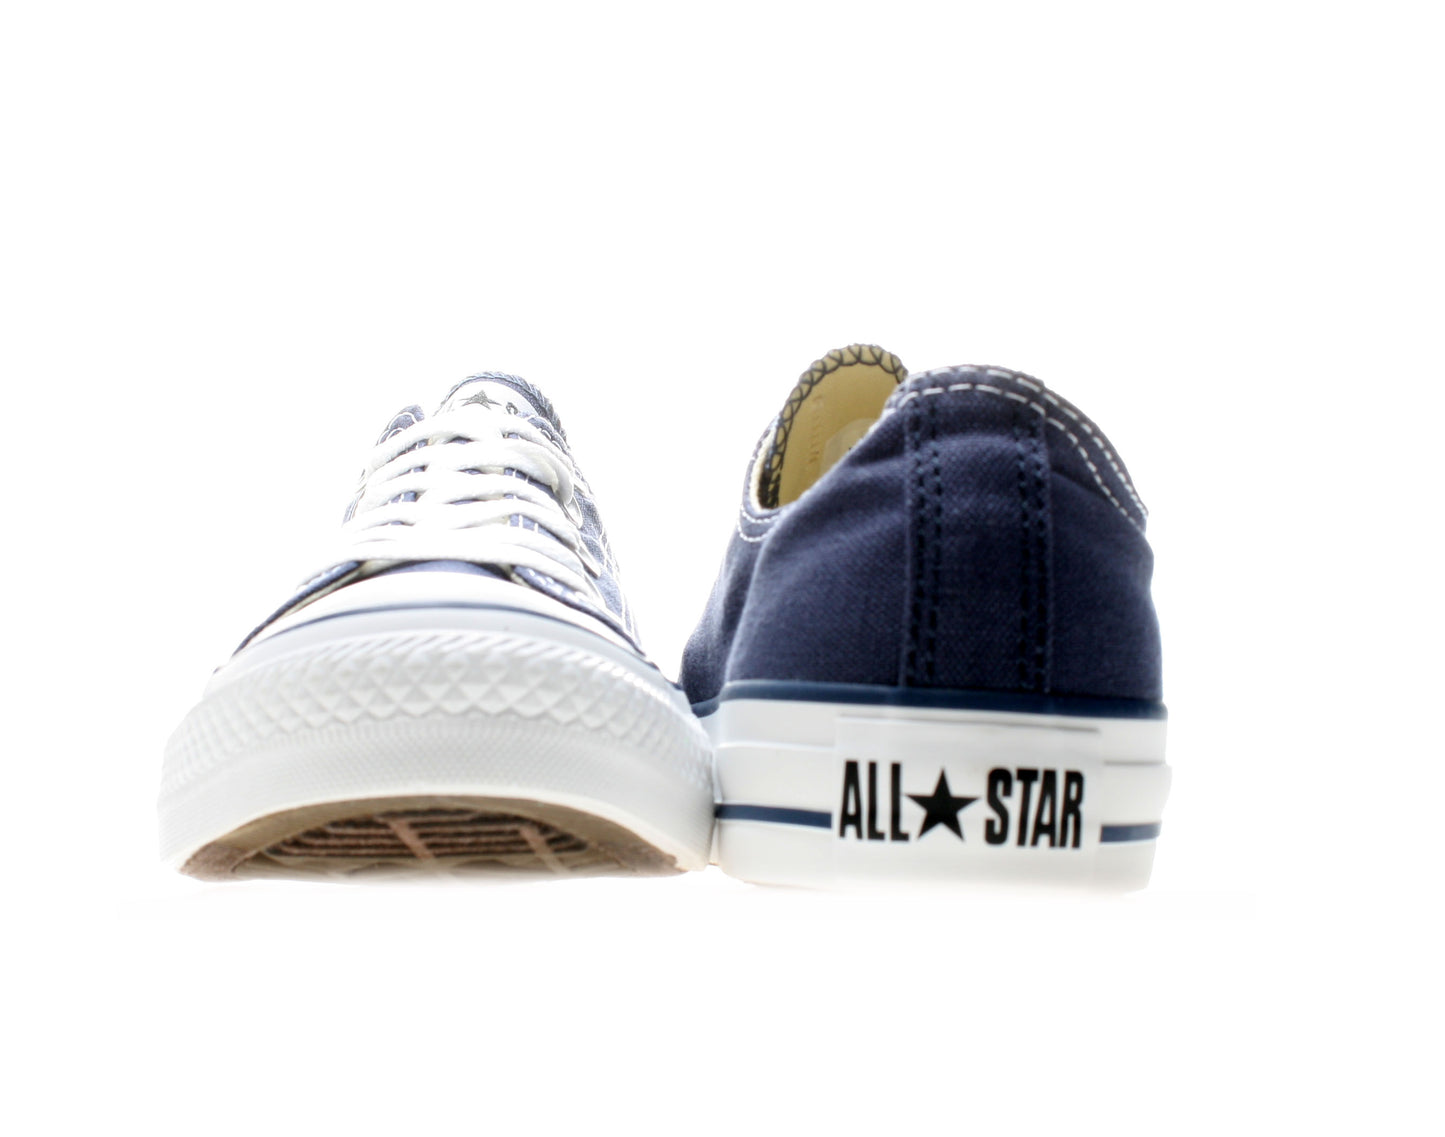 Converse Chuck Taylor All Star OX Navy Low Top Sneakers M9697